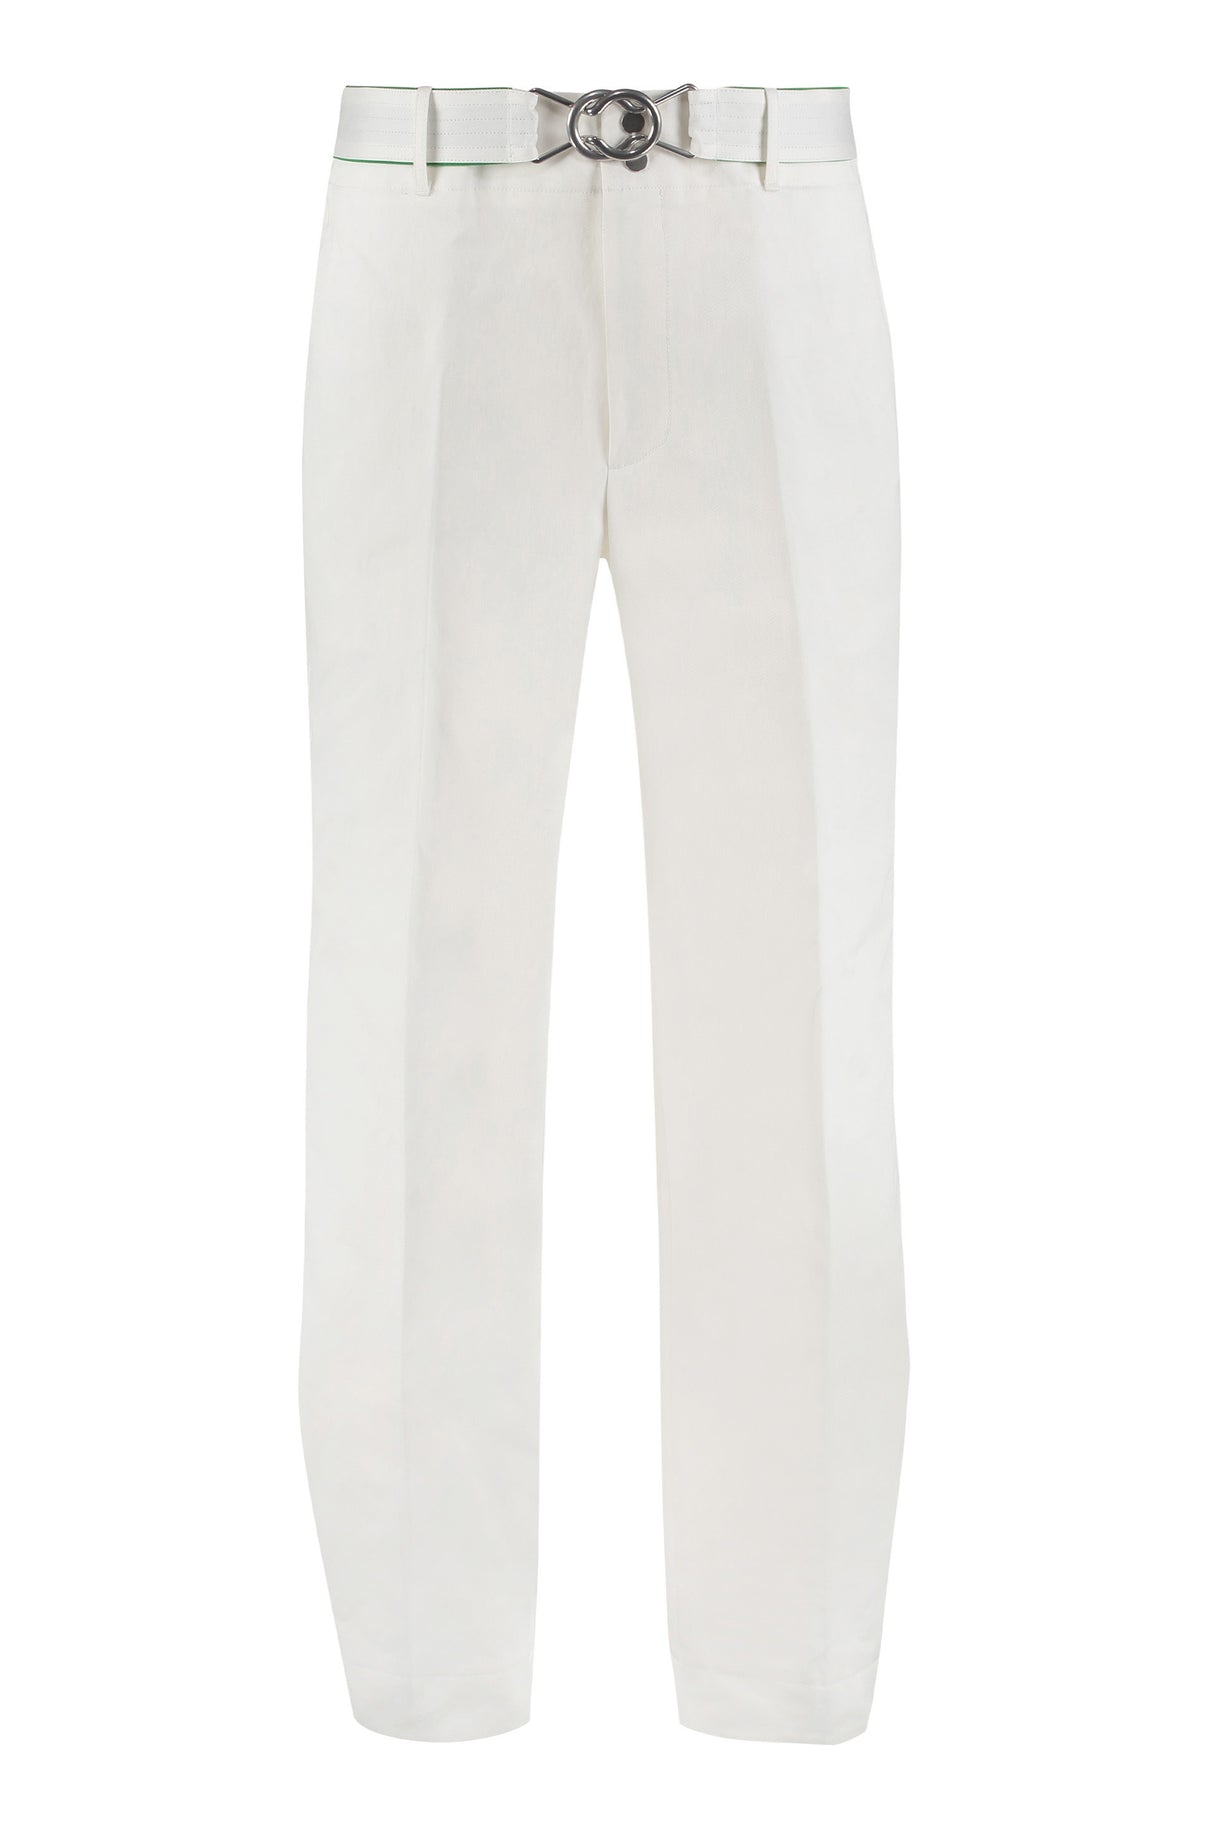 BOTTEGA VENETA Men's White Cotton Trousers with Removable Belt and Horn Buttons - SS22